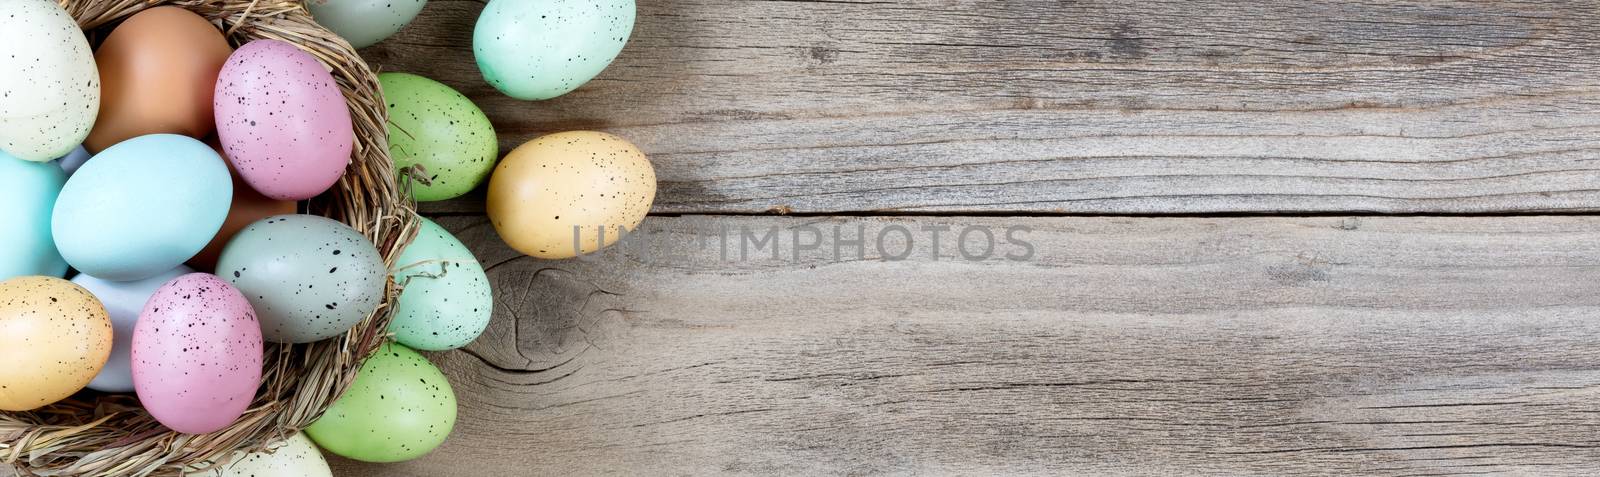 Easter eggs on rustic wooden background by tab1962